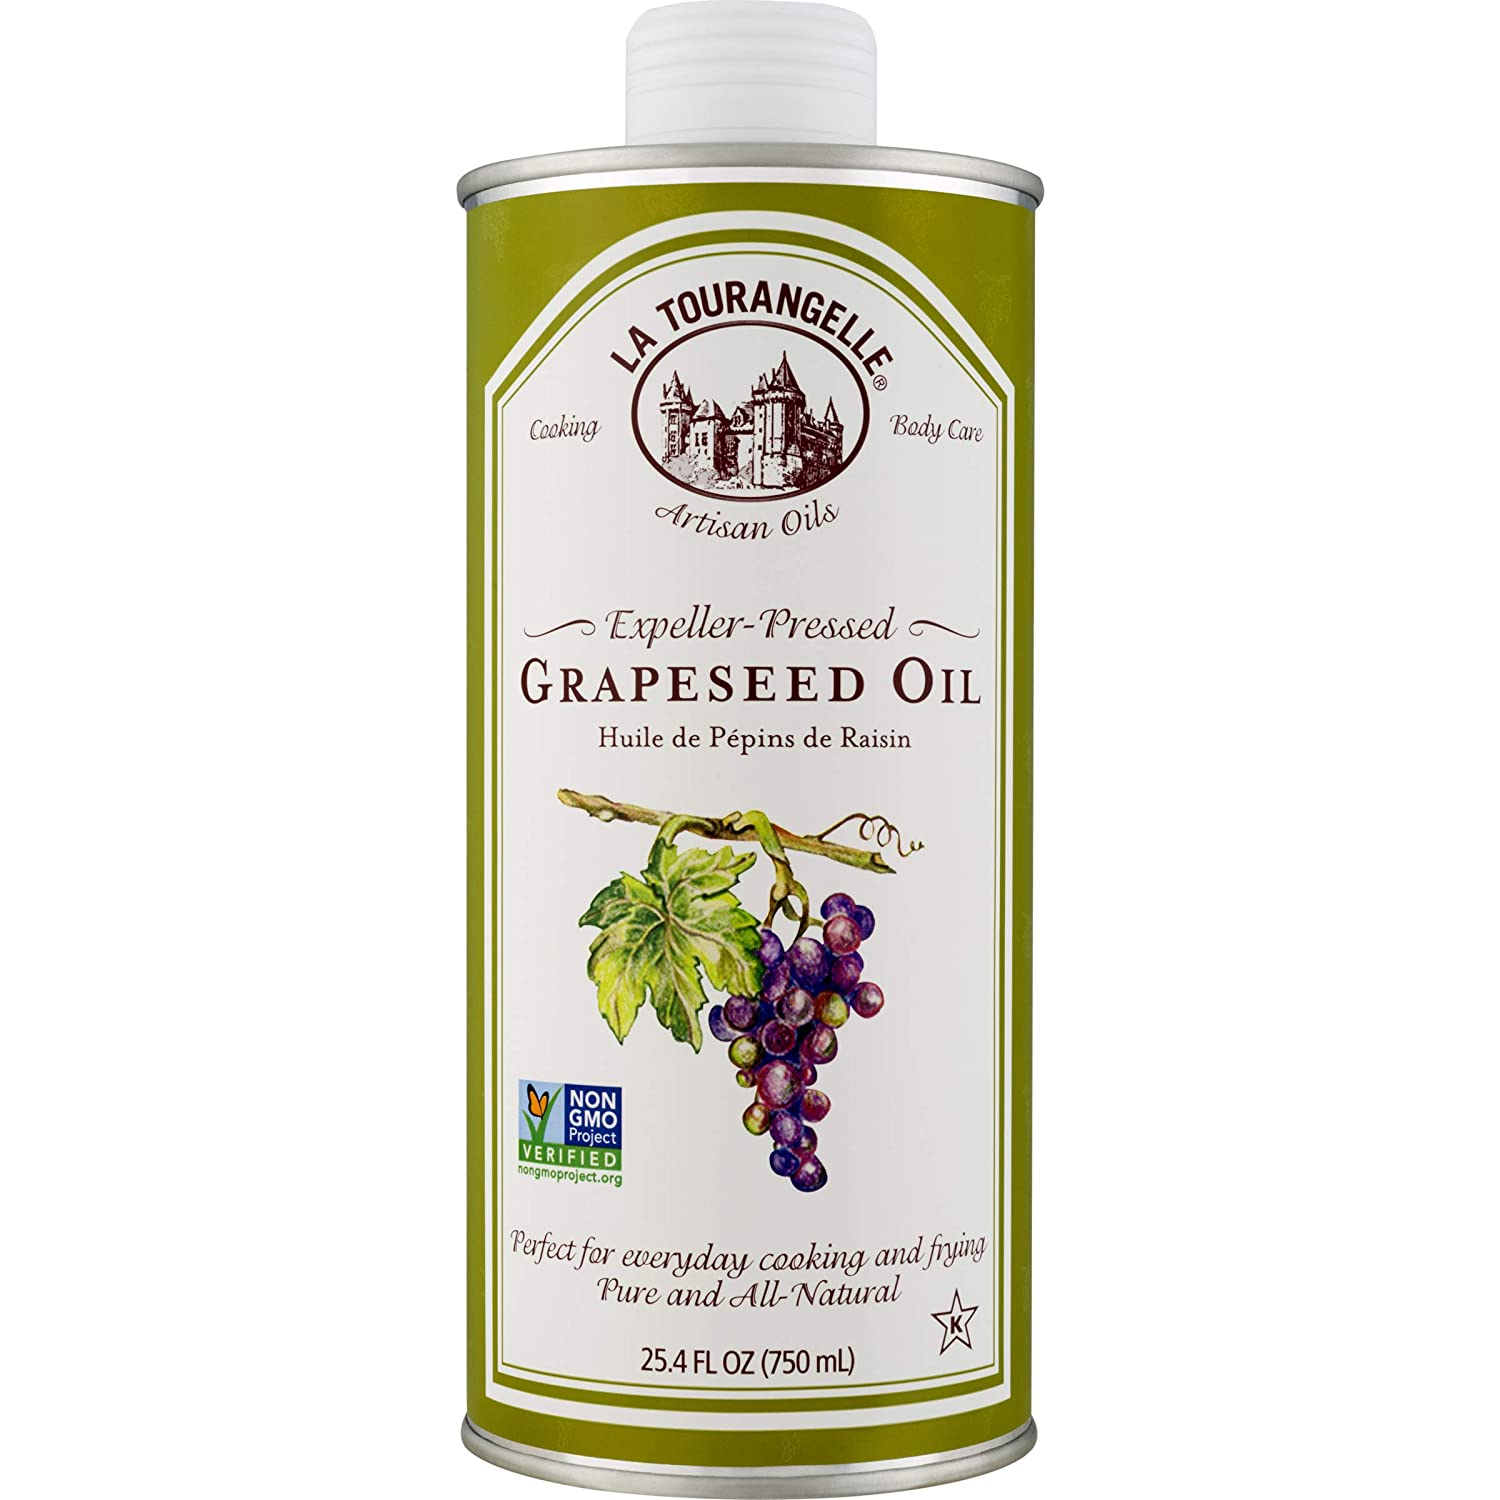 Grapeseed Oil 25.4 Fl Oz, All-Natural, Artisanal, Great for Cooking, Sauteing, Marinating, and Dressing